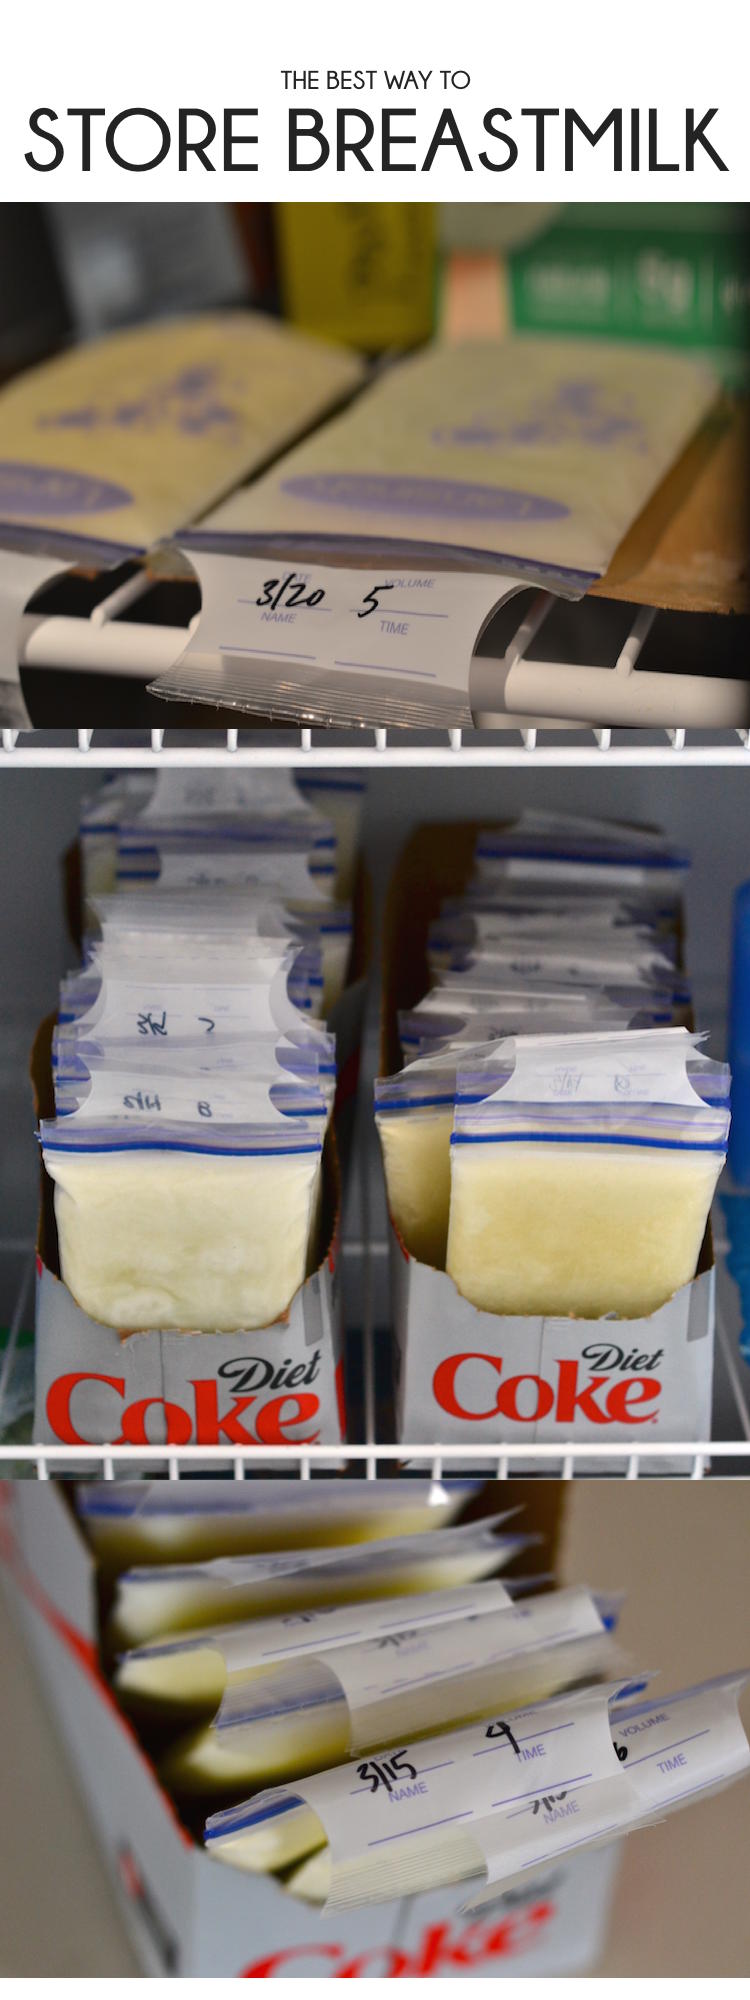 this is the best way to store breast milk // lovelyluckylife.com